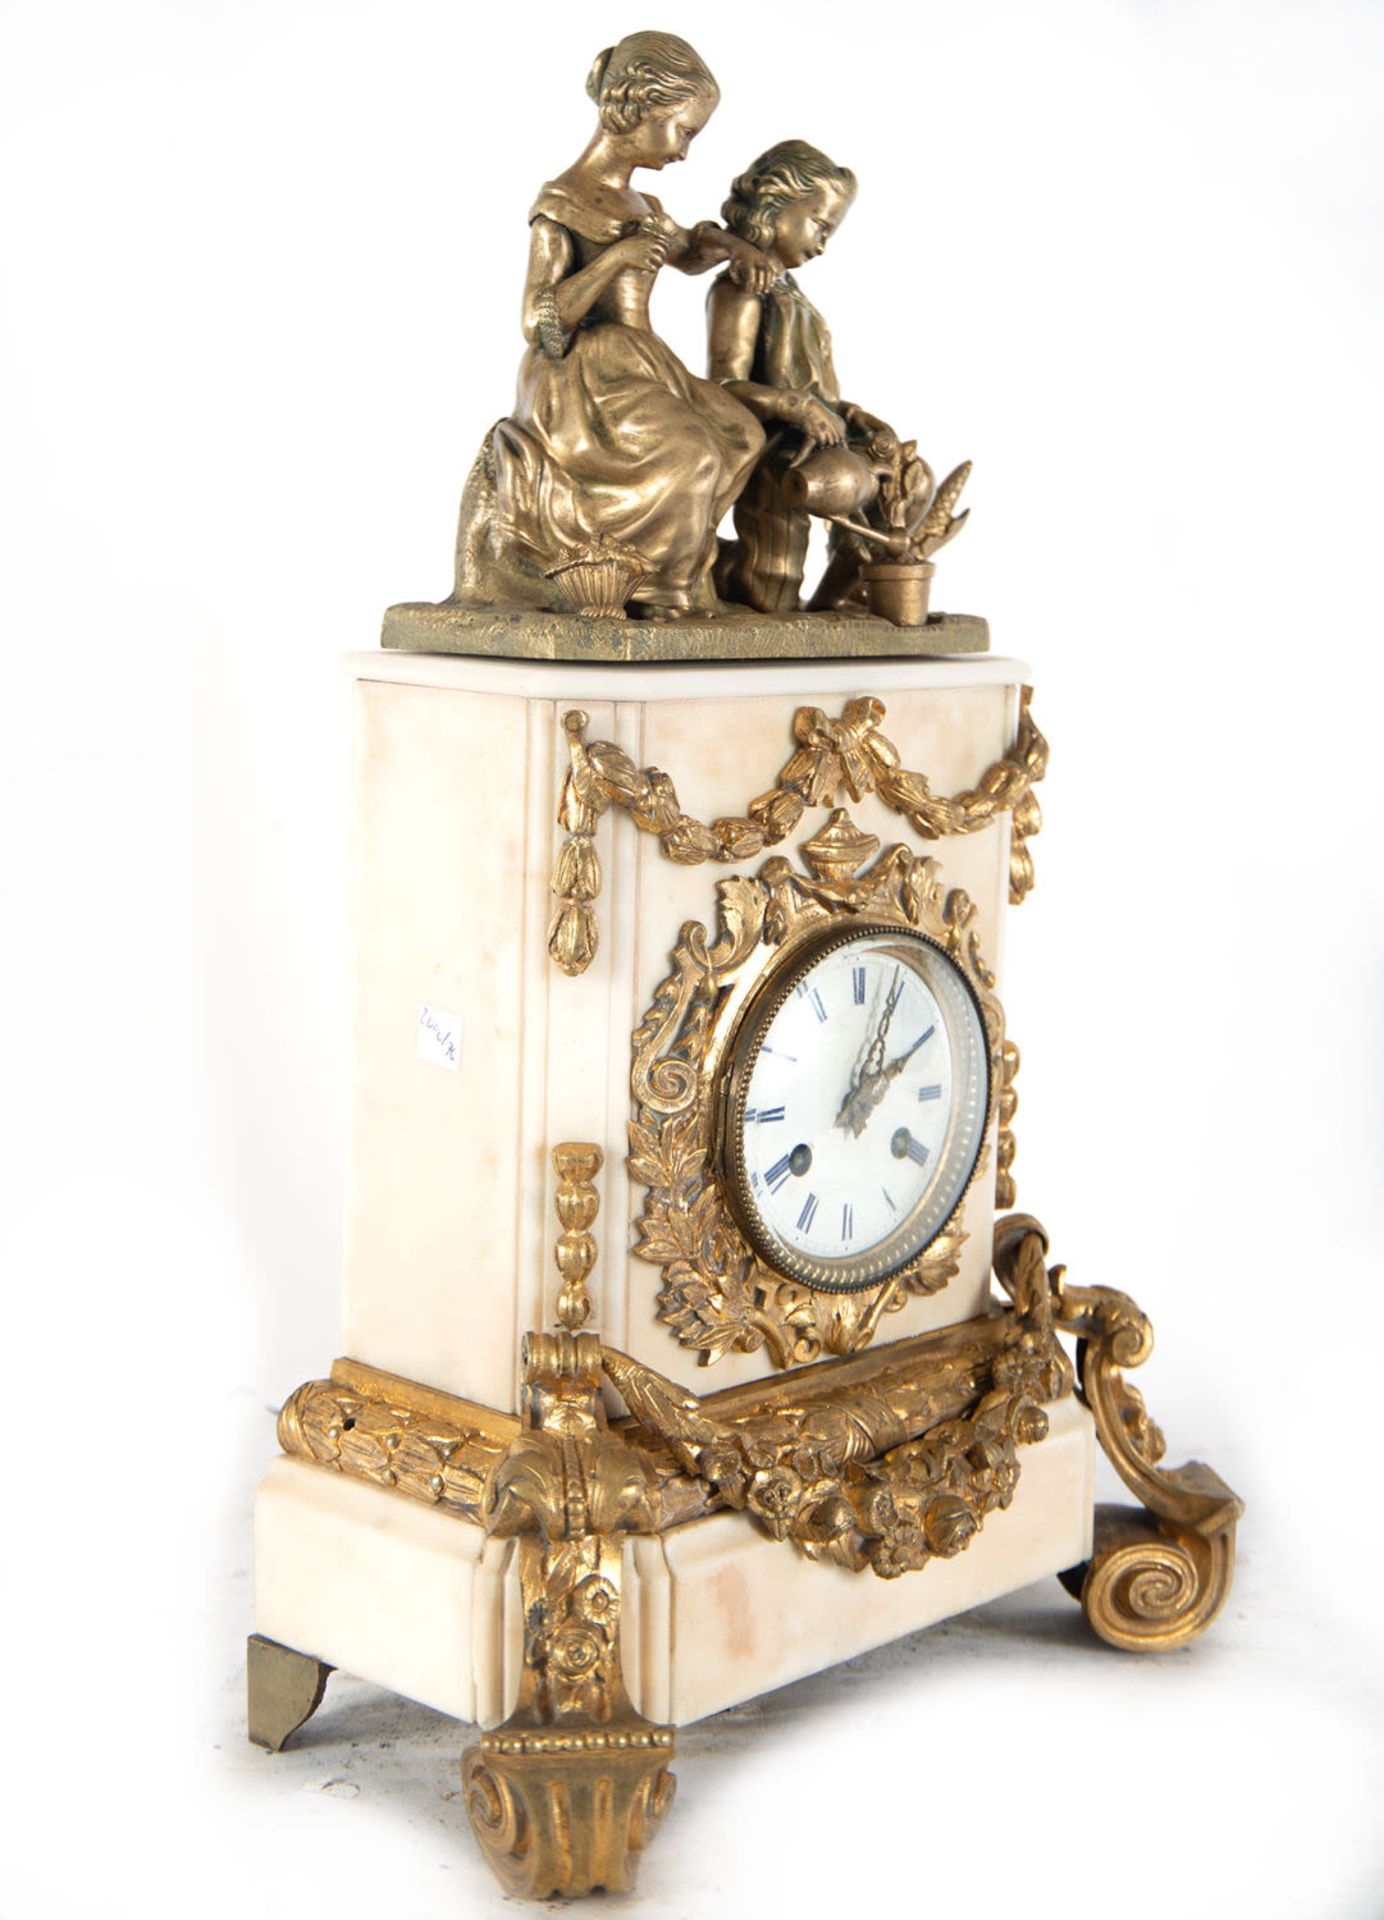 Bronze and marble clock depicting a couple watering pots, 19th century - Image 3 of 6